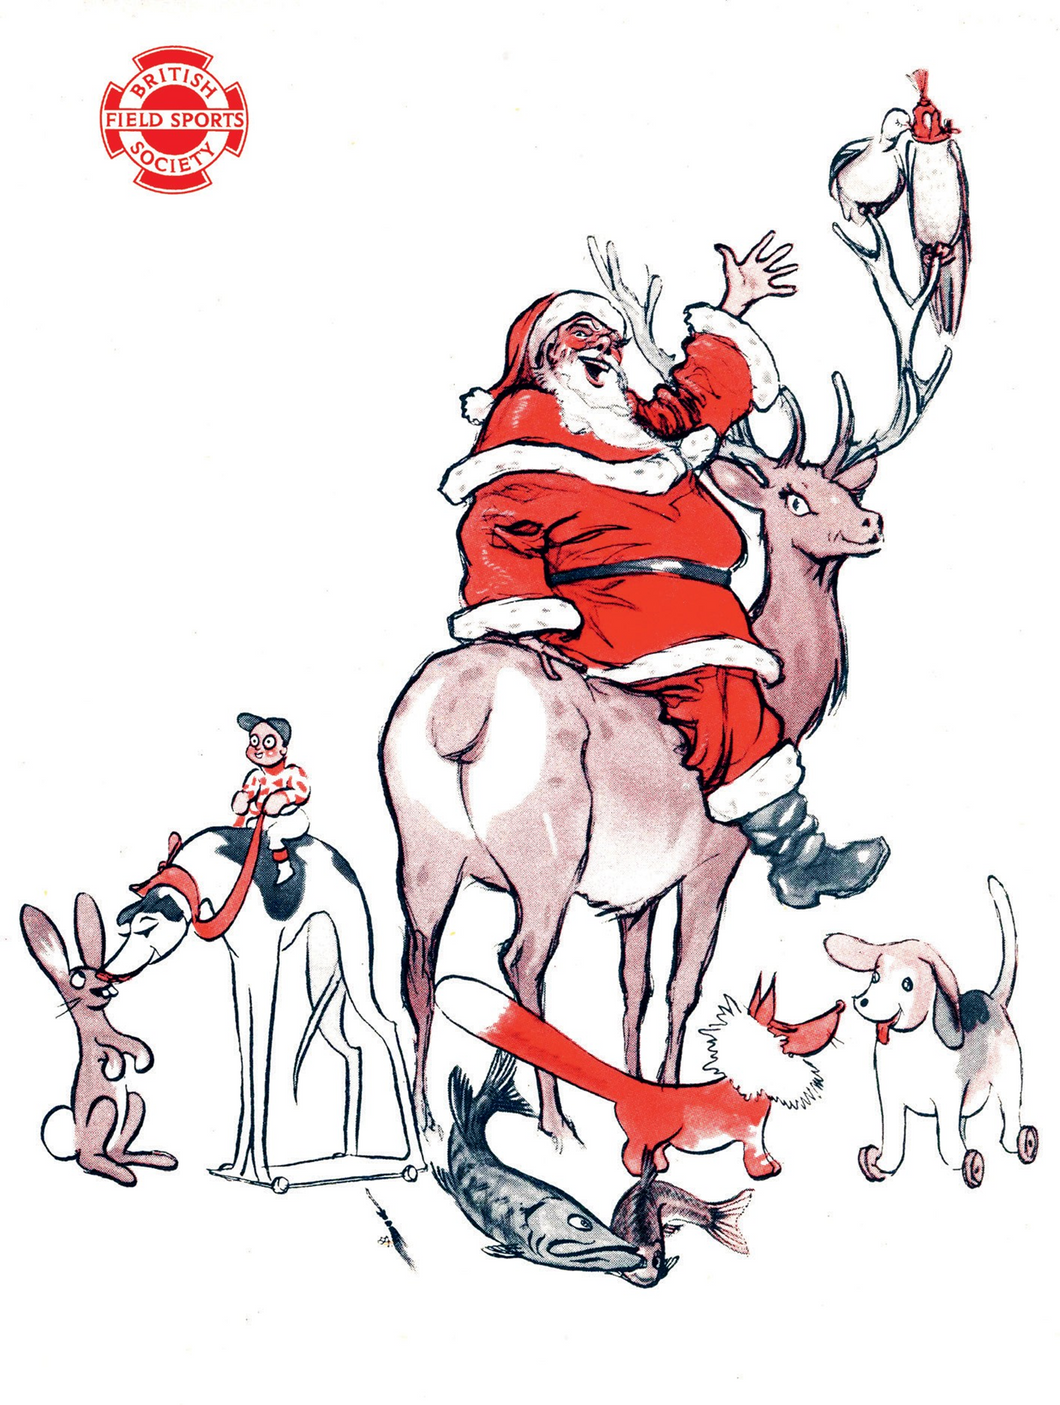 1954 Christmas Card Illustration for the British Field Sports Society (Pack of 10 Cards)